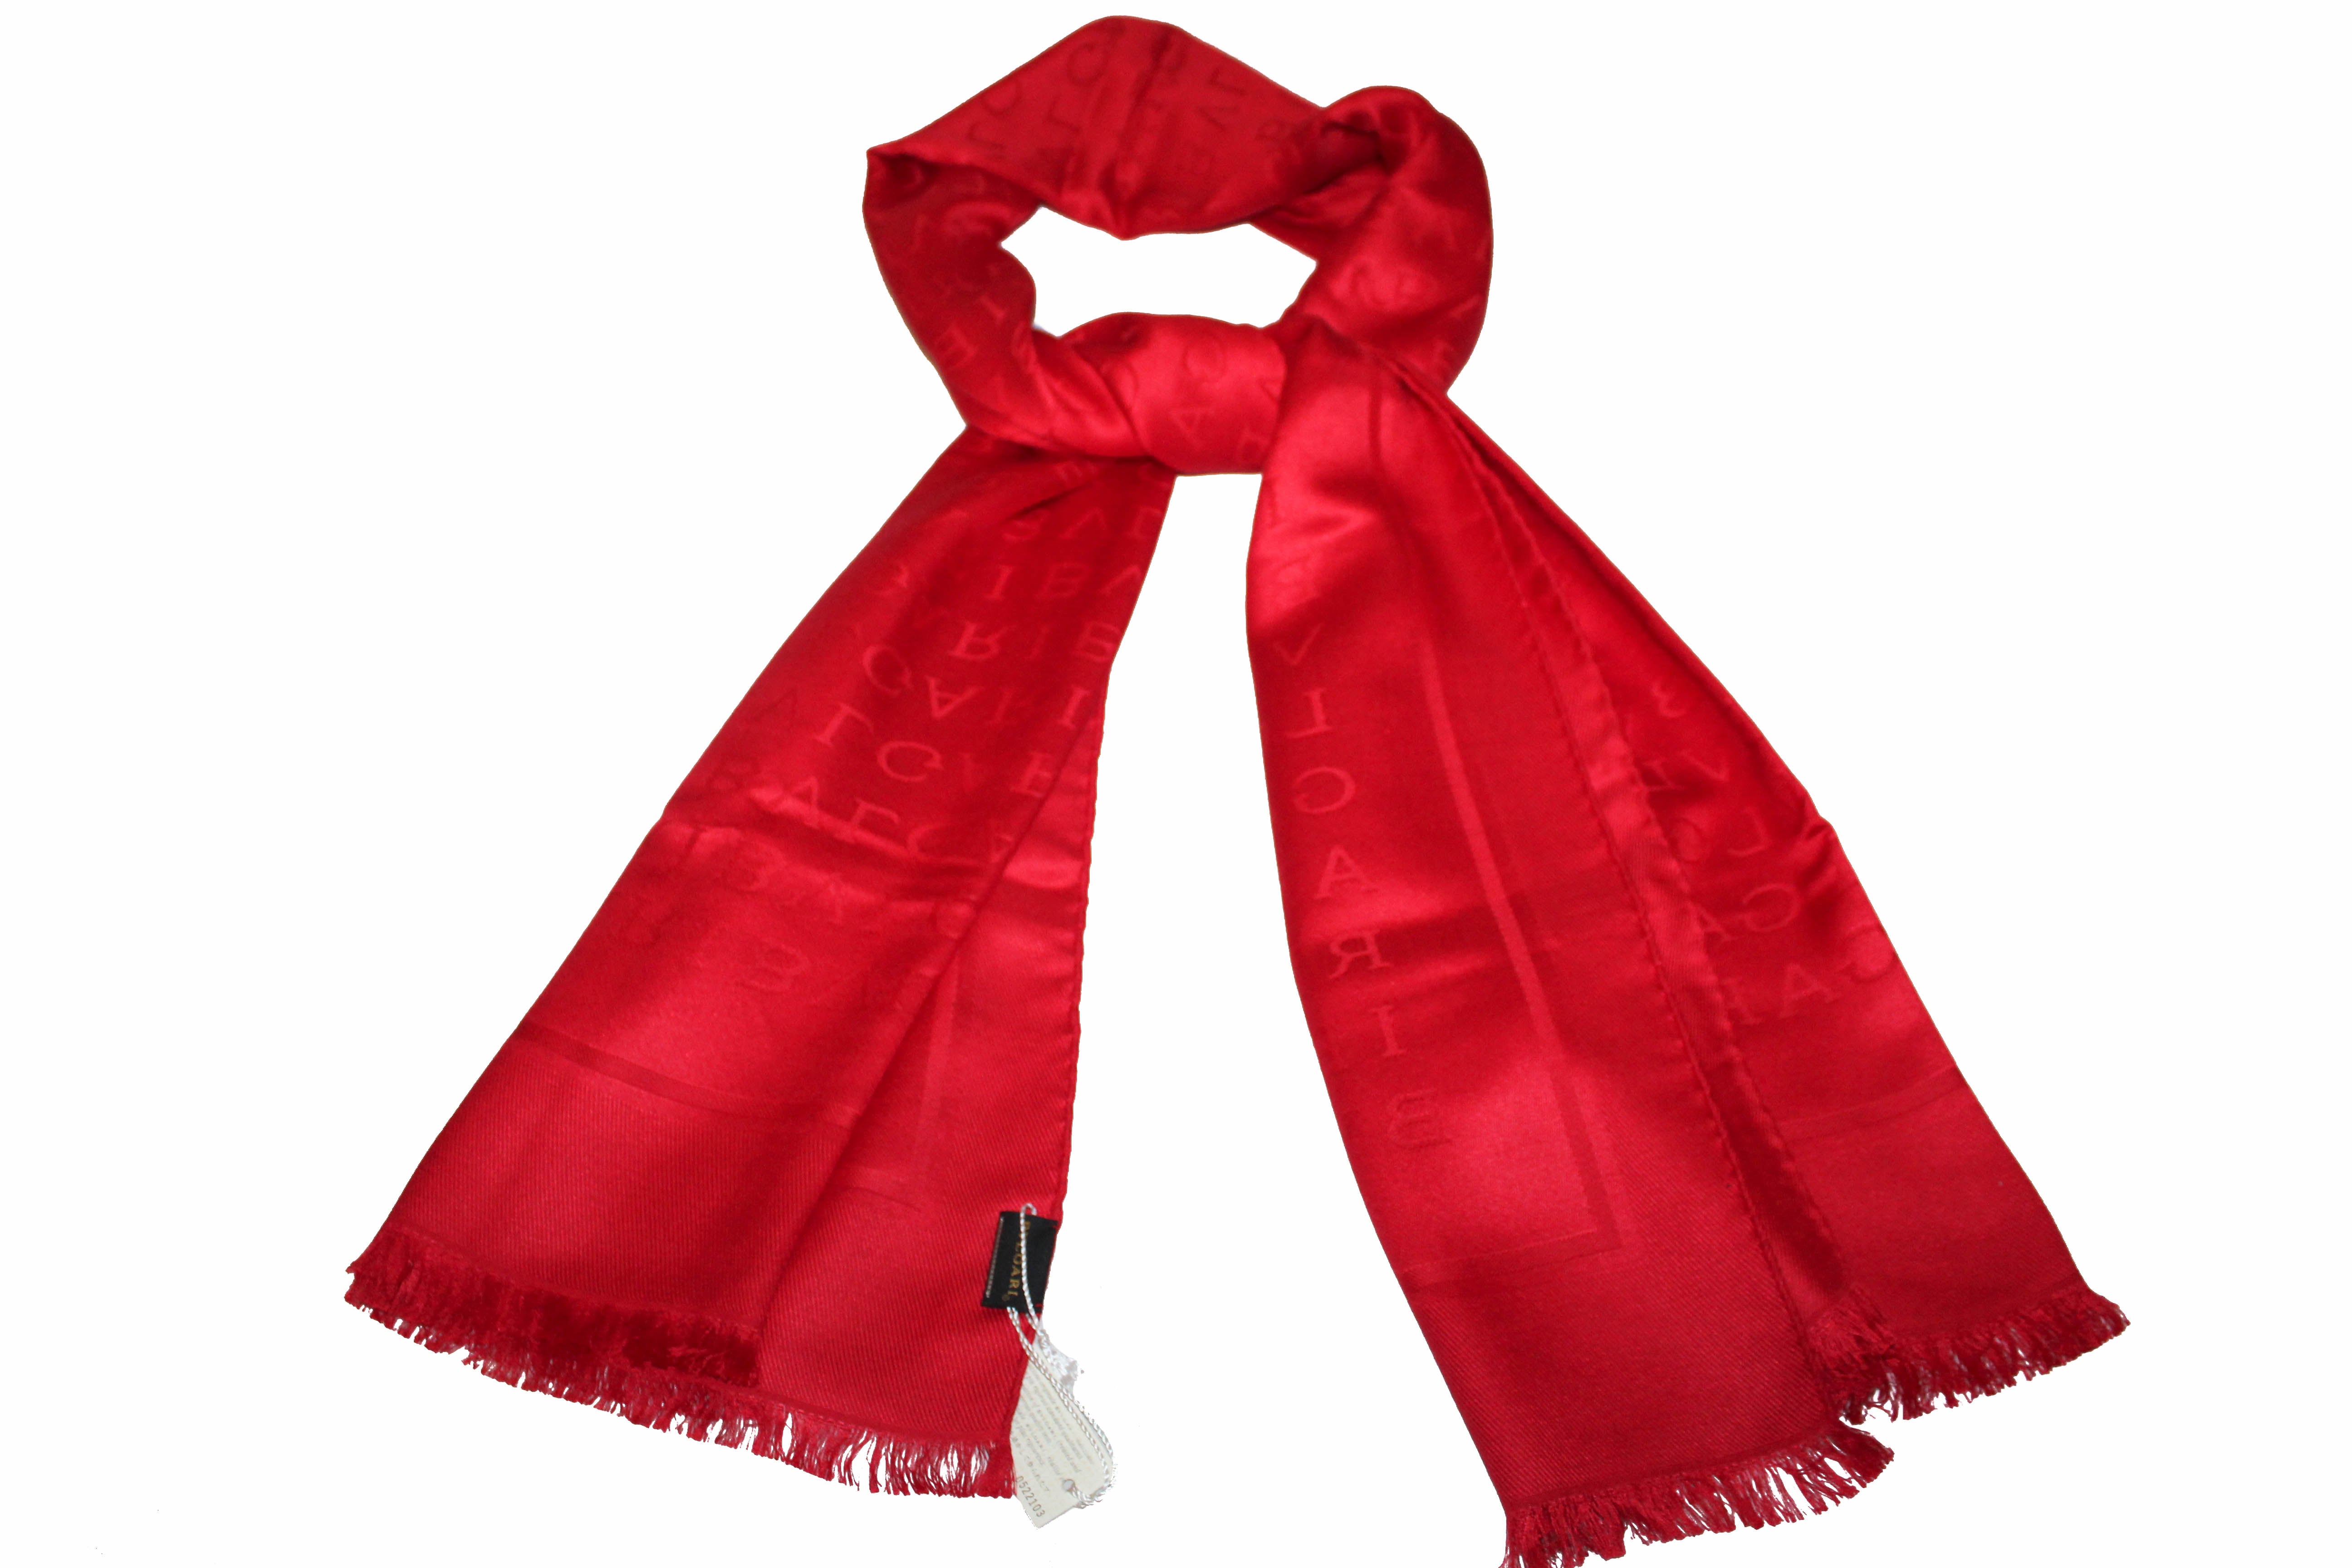 Luxury Wool Scarf Set For Men And Women Designer Cashmere Red Knit Scarf  And Gloves With Dragonflies Design Perfect For Winter Fashion From  Airpodsaa, $49.37